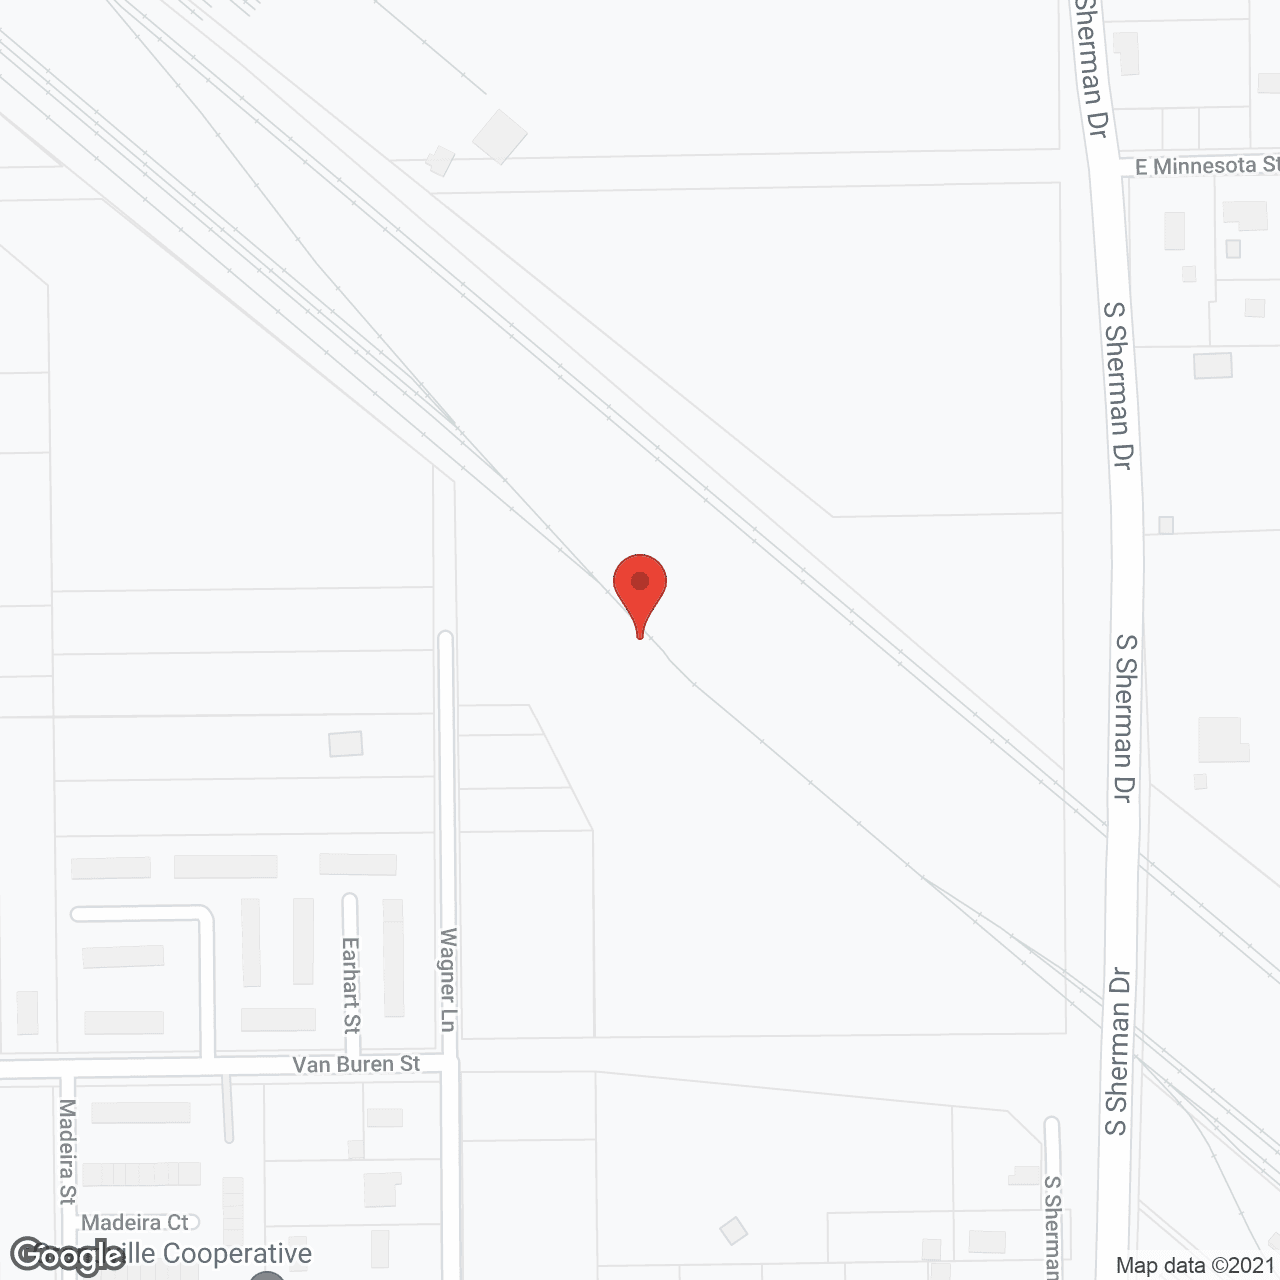 Independent Adult Day Care Centers - Indianapolis South in google map